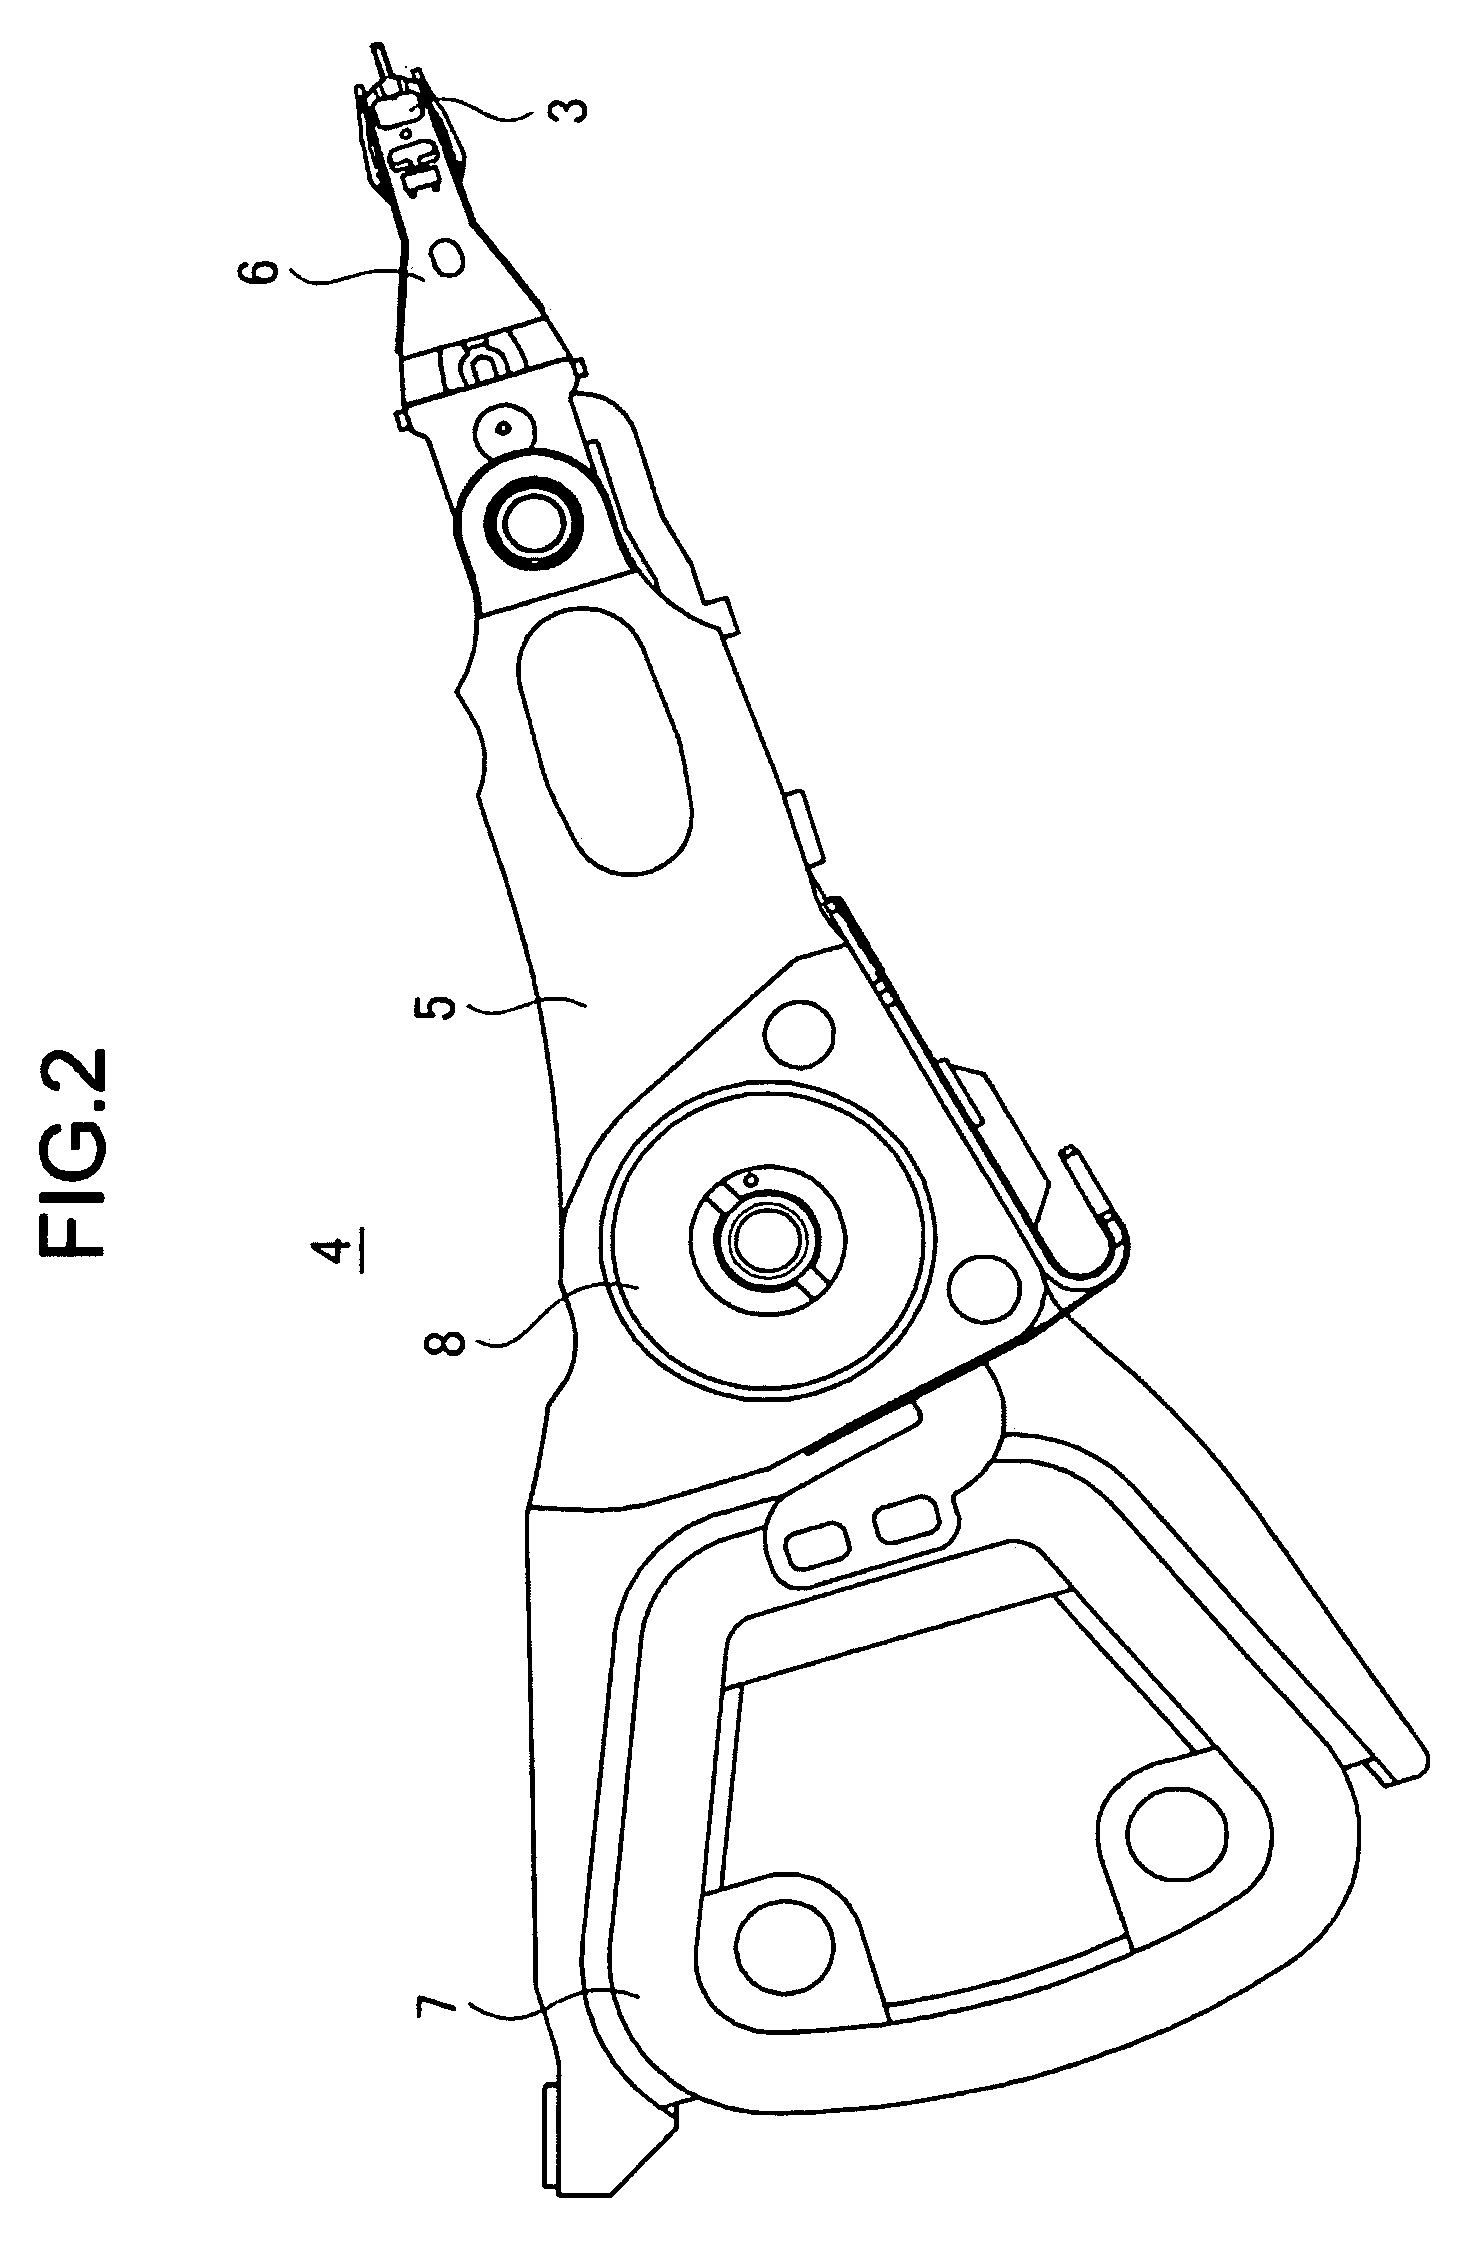 Suspension equipped with vibration sensor and manufacturing method thereof